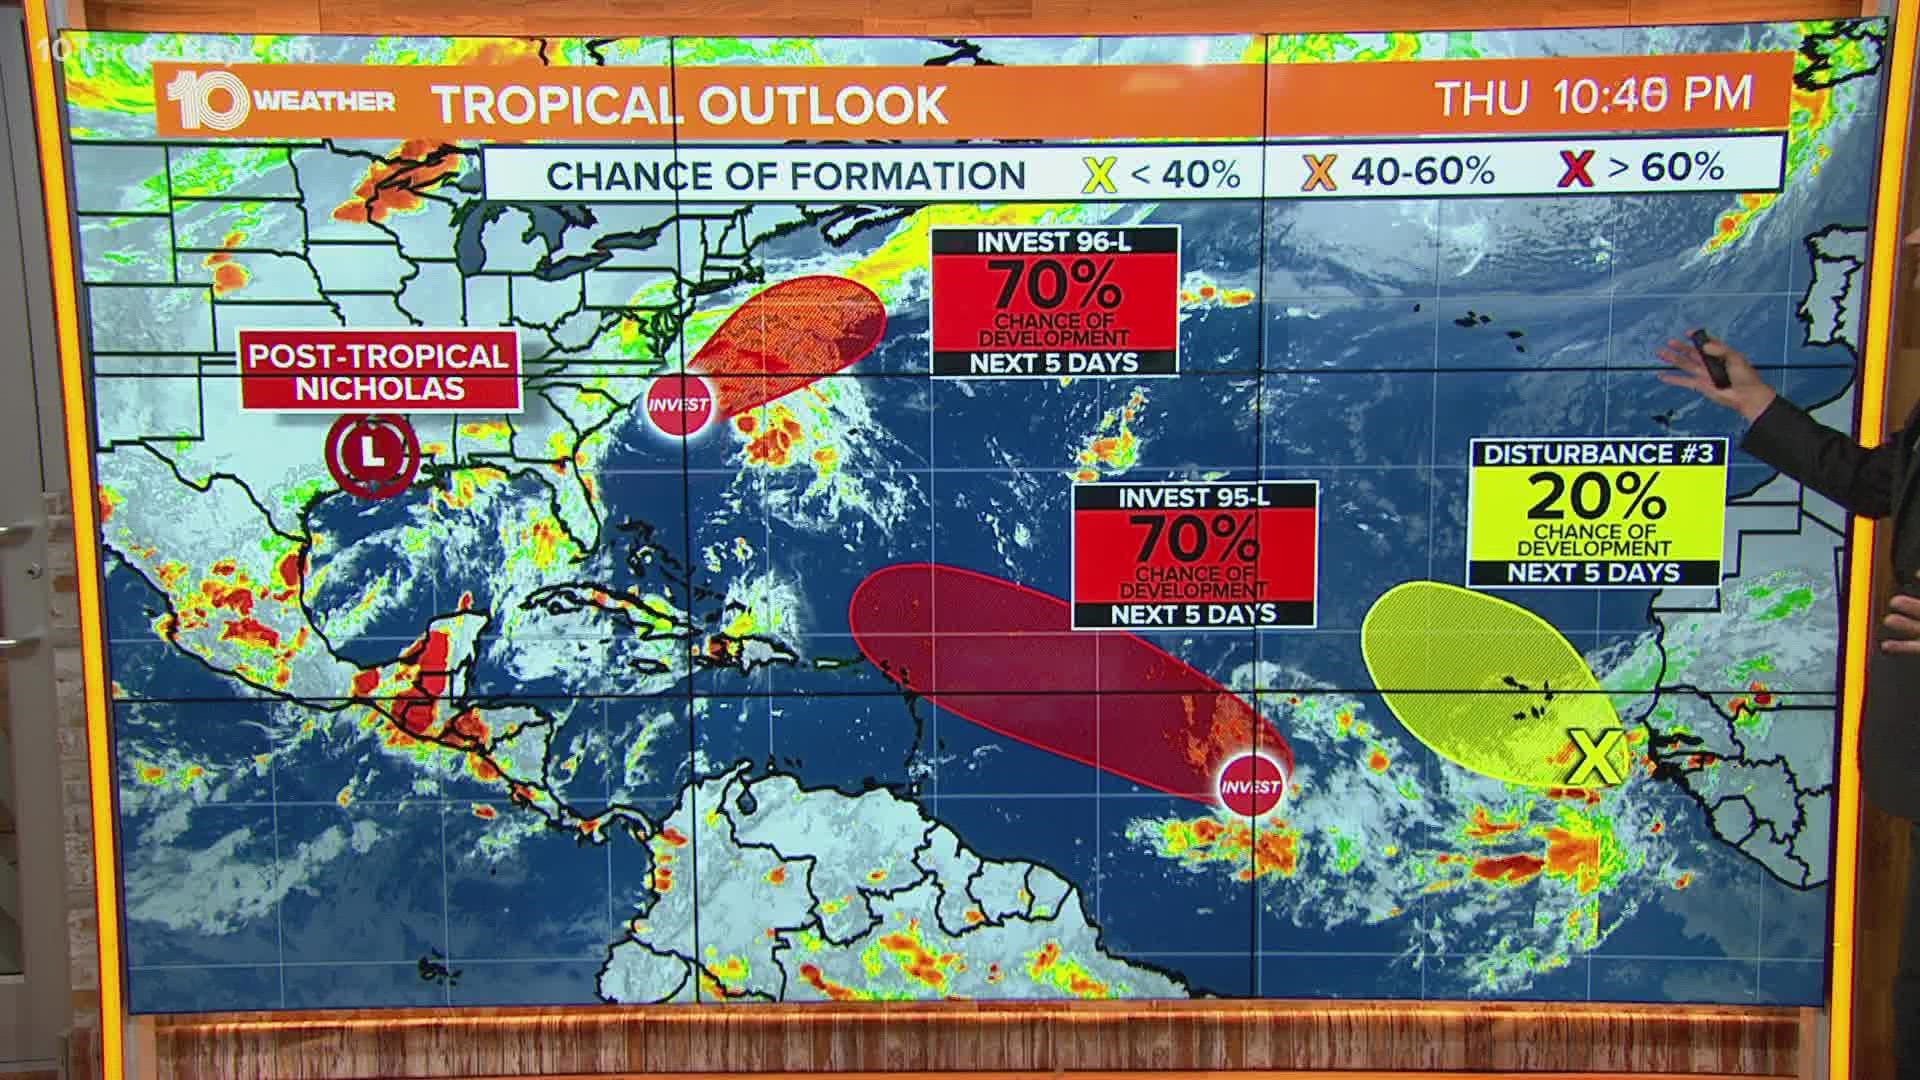 Two systems have the potential to develop into depressions or storms in the next five days.